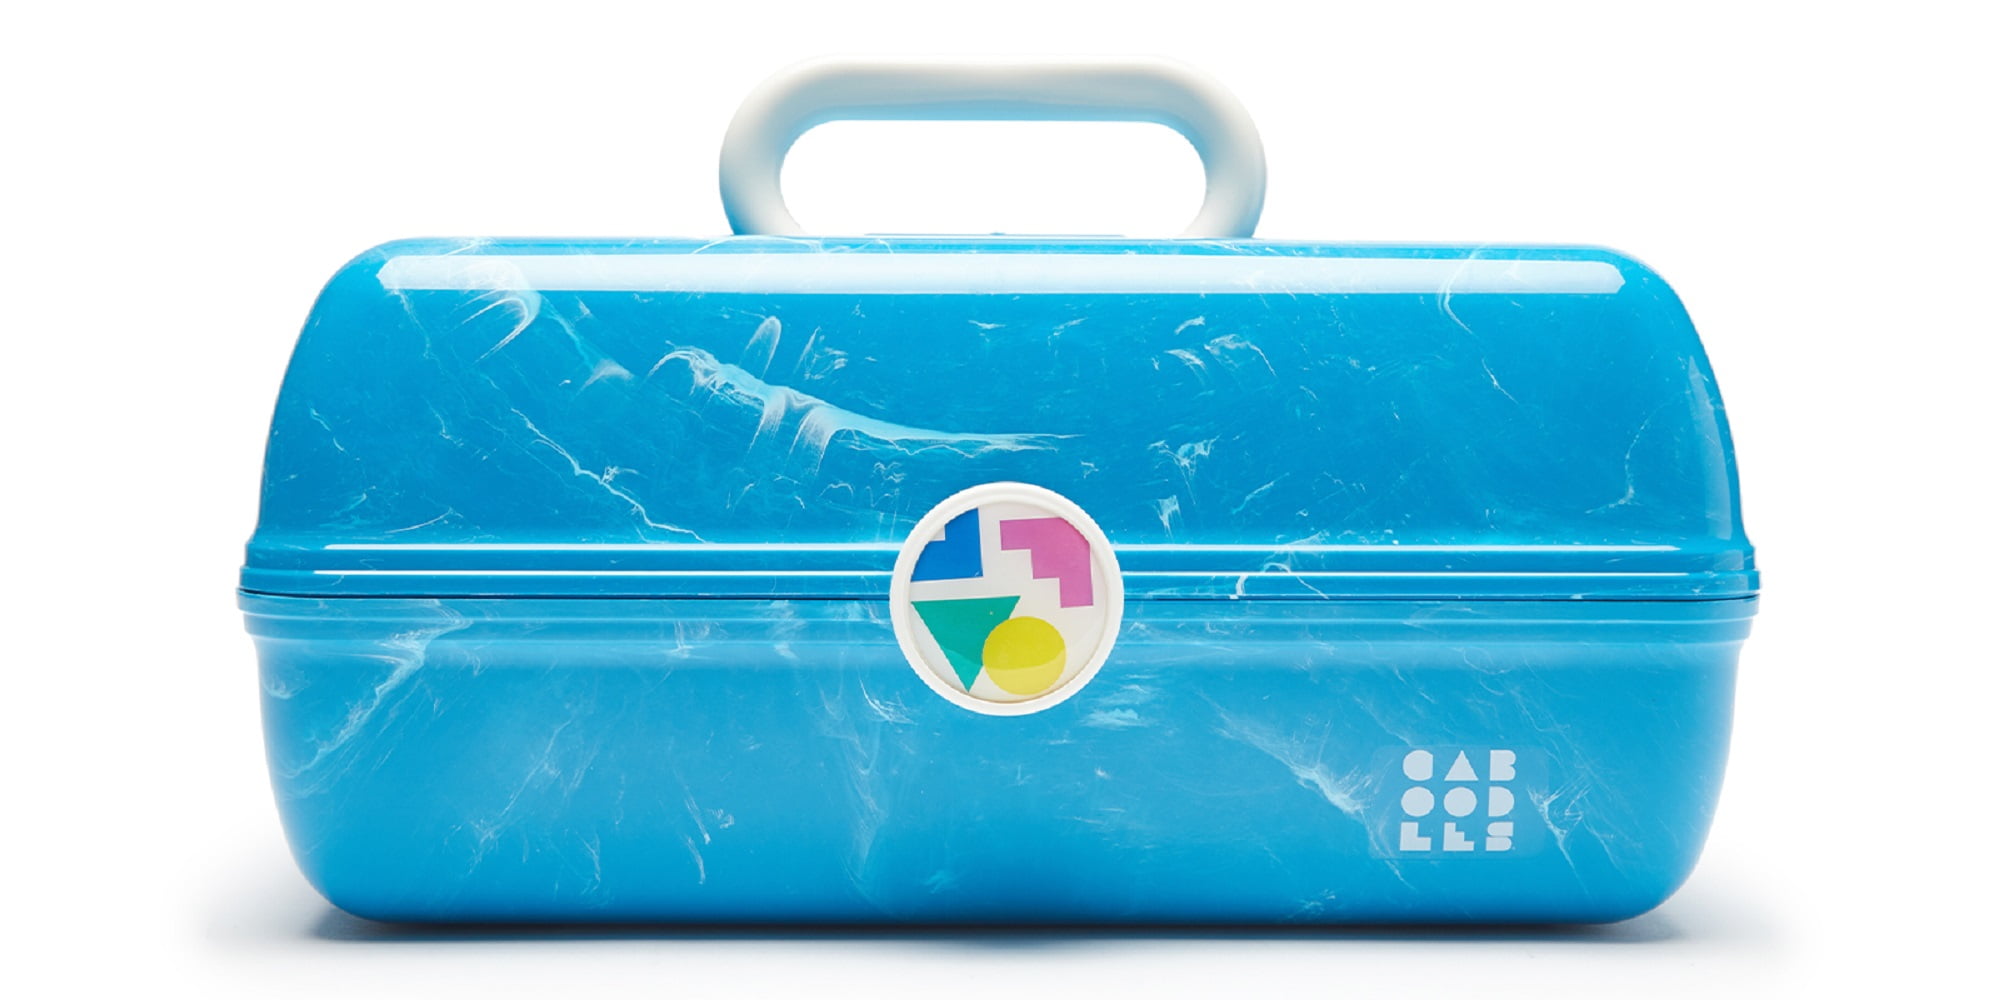 Caboodles On-The-Go Girl Storage Makeup Bag - Teal Marble